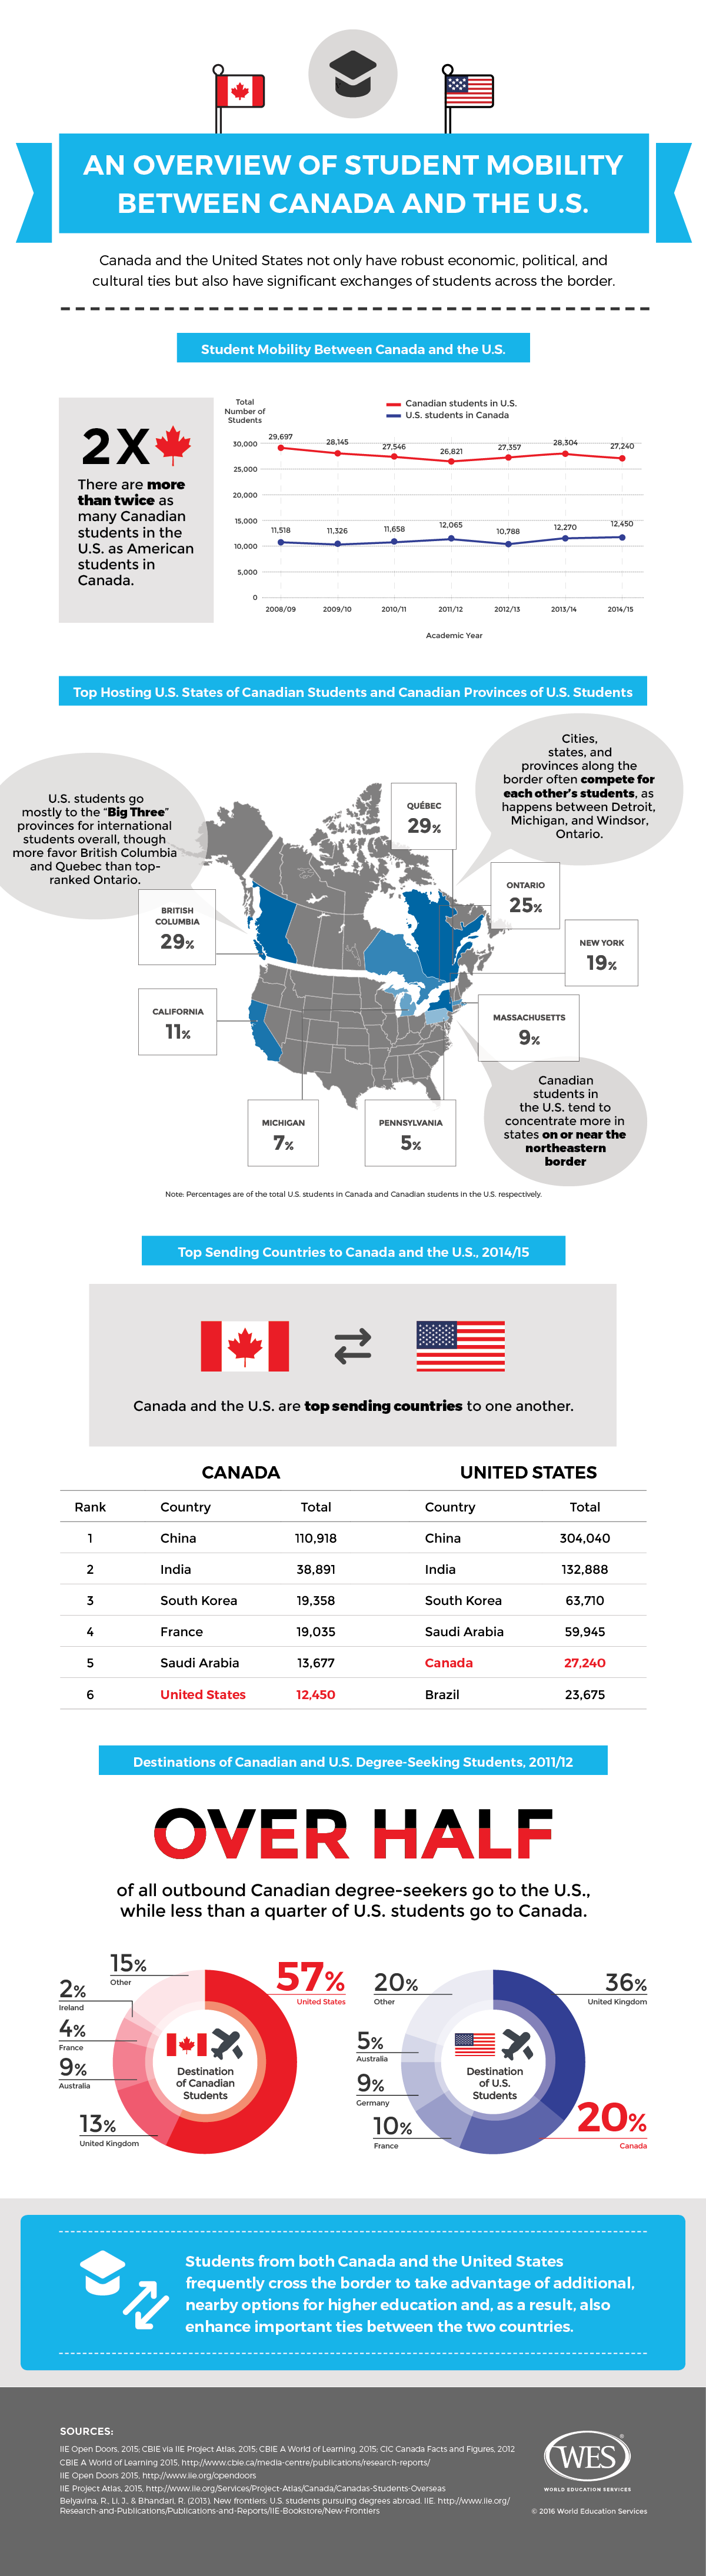 An infographic presenting an overview of international student mobility between Canada and the U.S. 